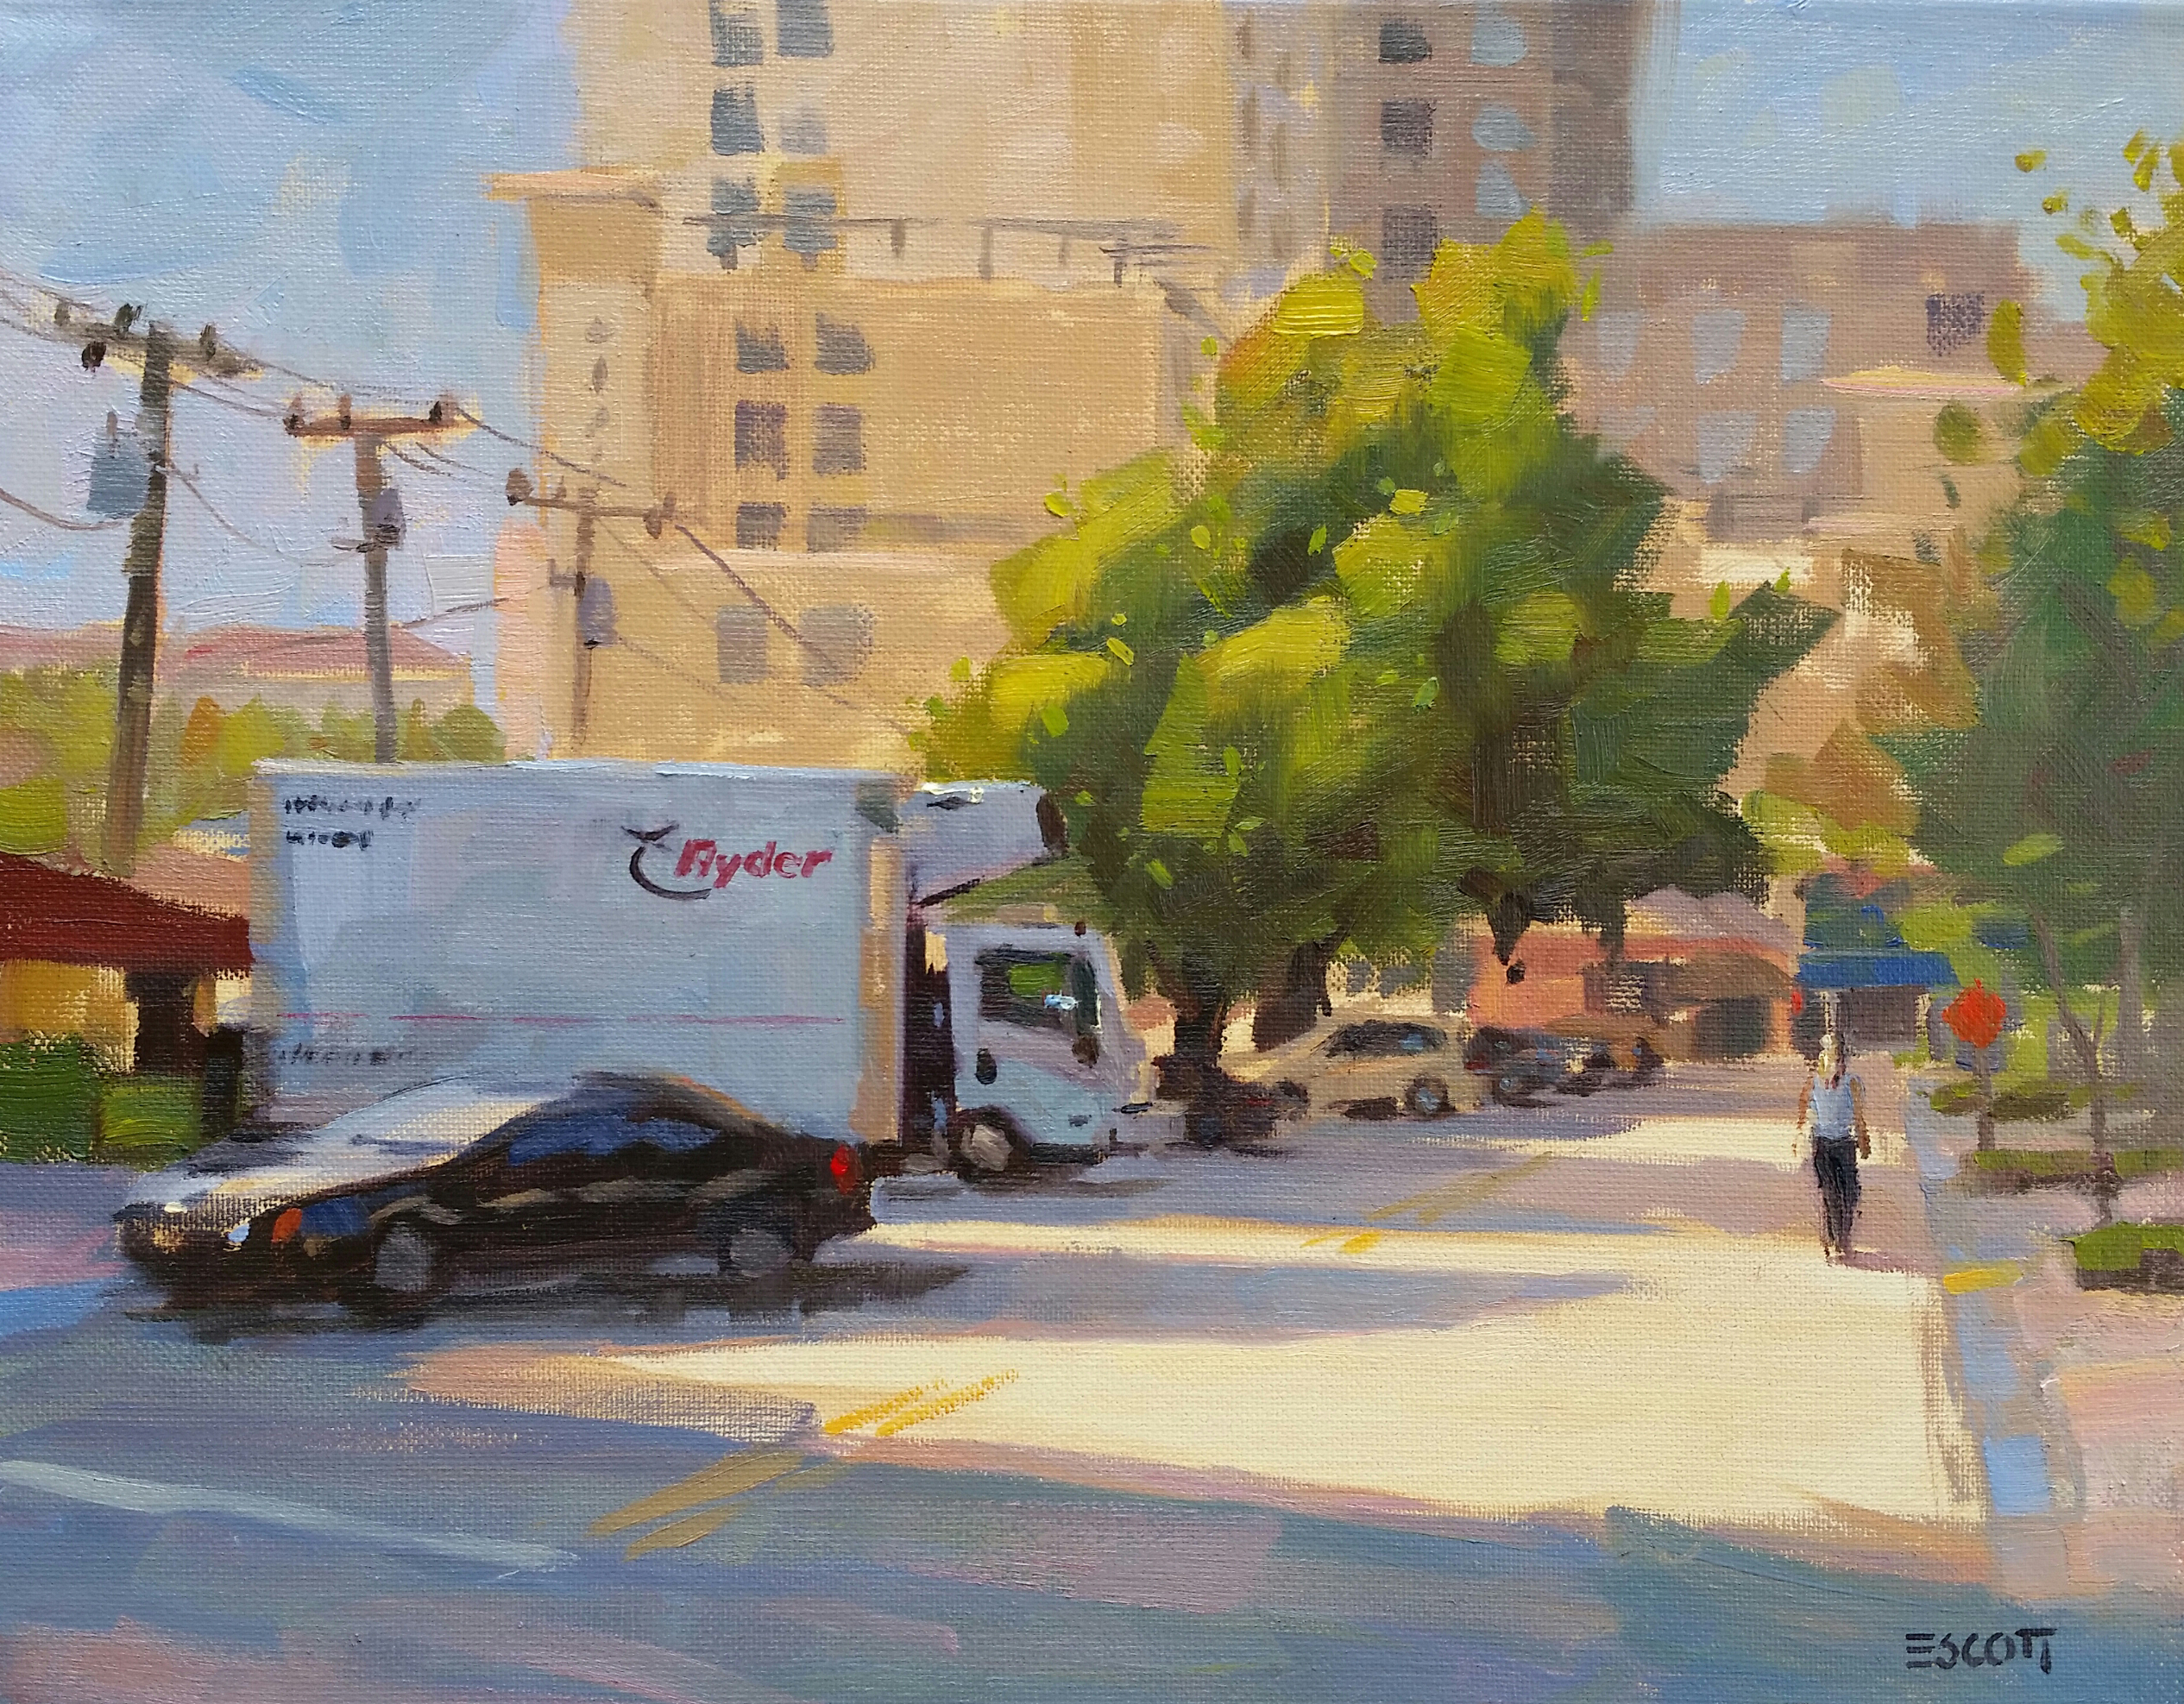 Shawn Escott, “Delivery Day,” 2018, oil, 11 x 14 in., Collection the artist, Plein air